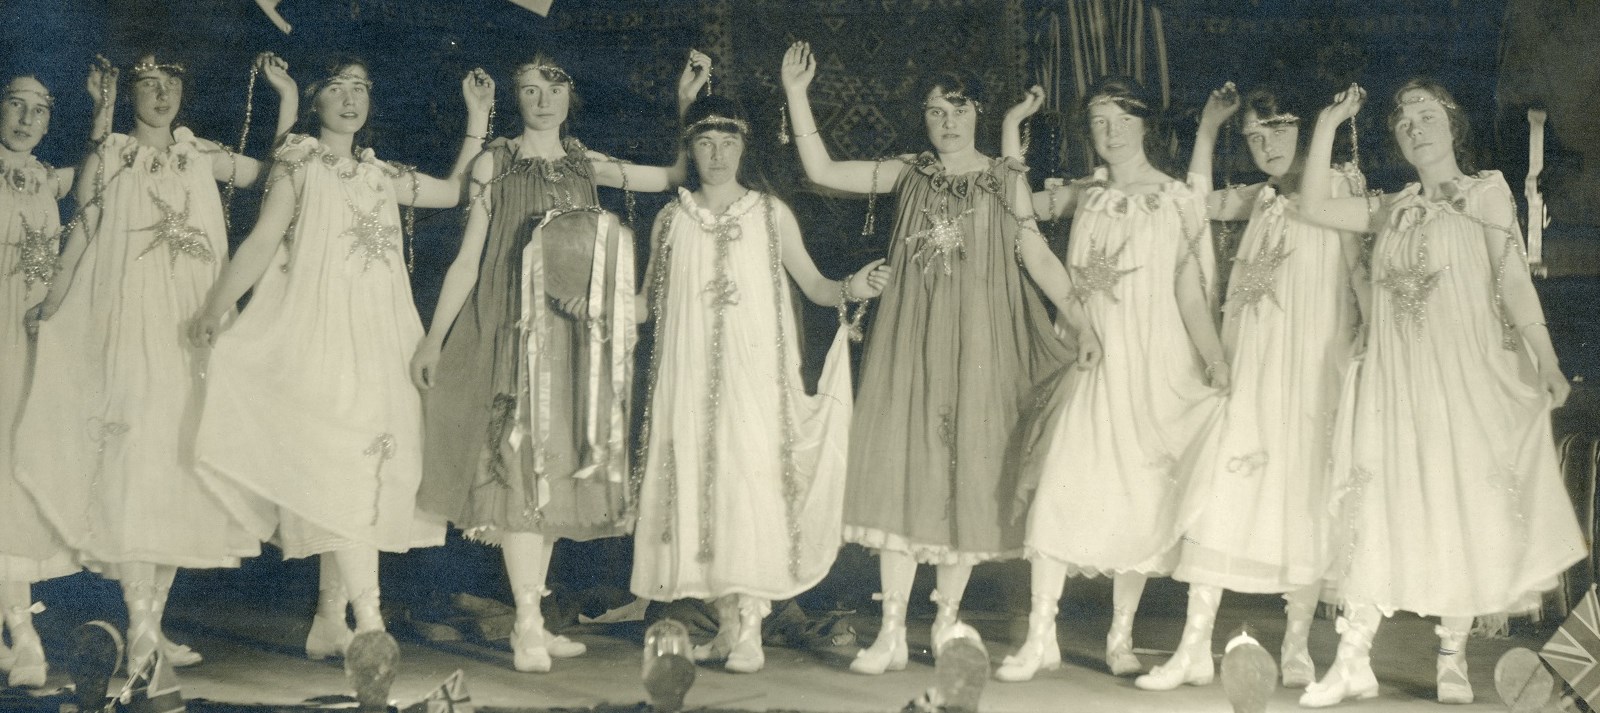 Black and white photo of nine women standing on stage in various poses, 1918